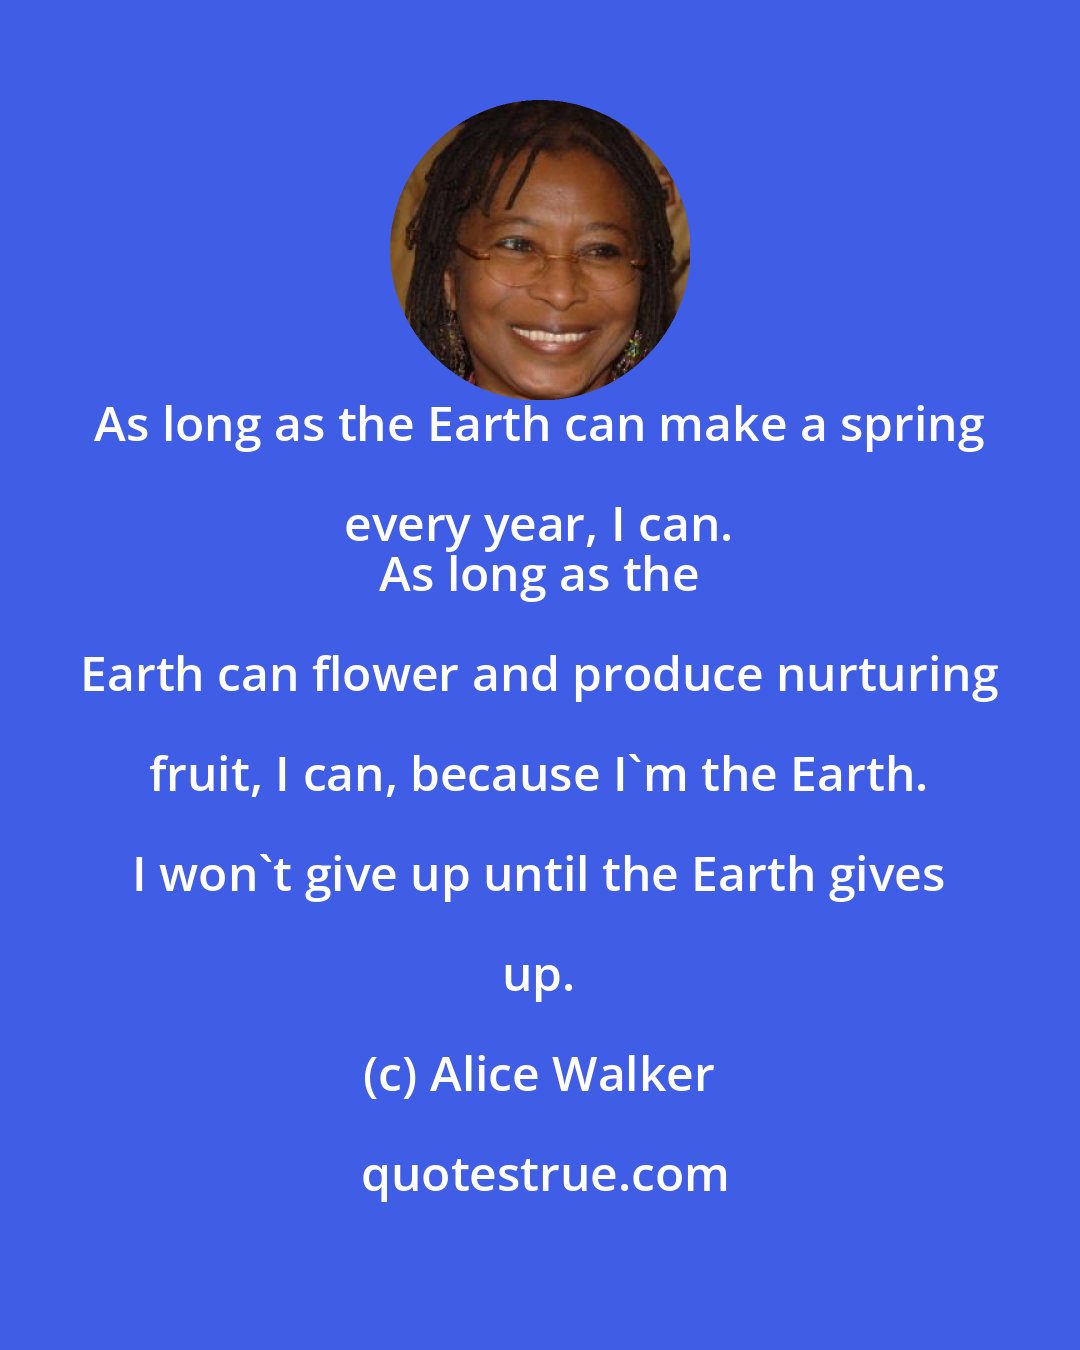 Alice Walker: As long as the Earth can make a spring every year, I can. 
 As long as the Earth can flower and produce nurturing fruit, I can, because I'm the Earth. I won't give up until the Earth gives up.